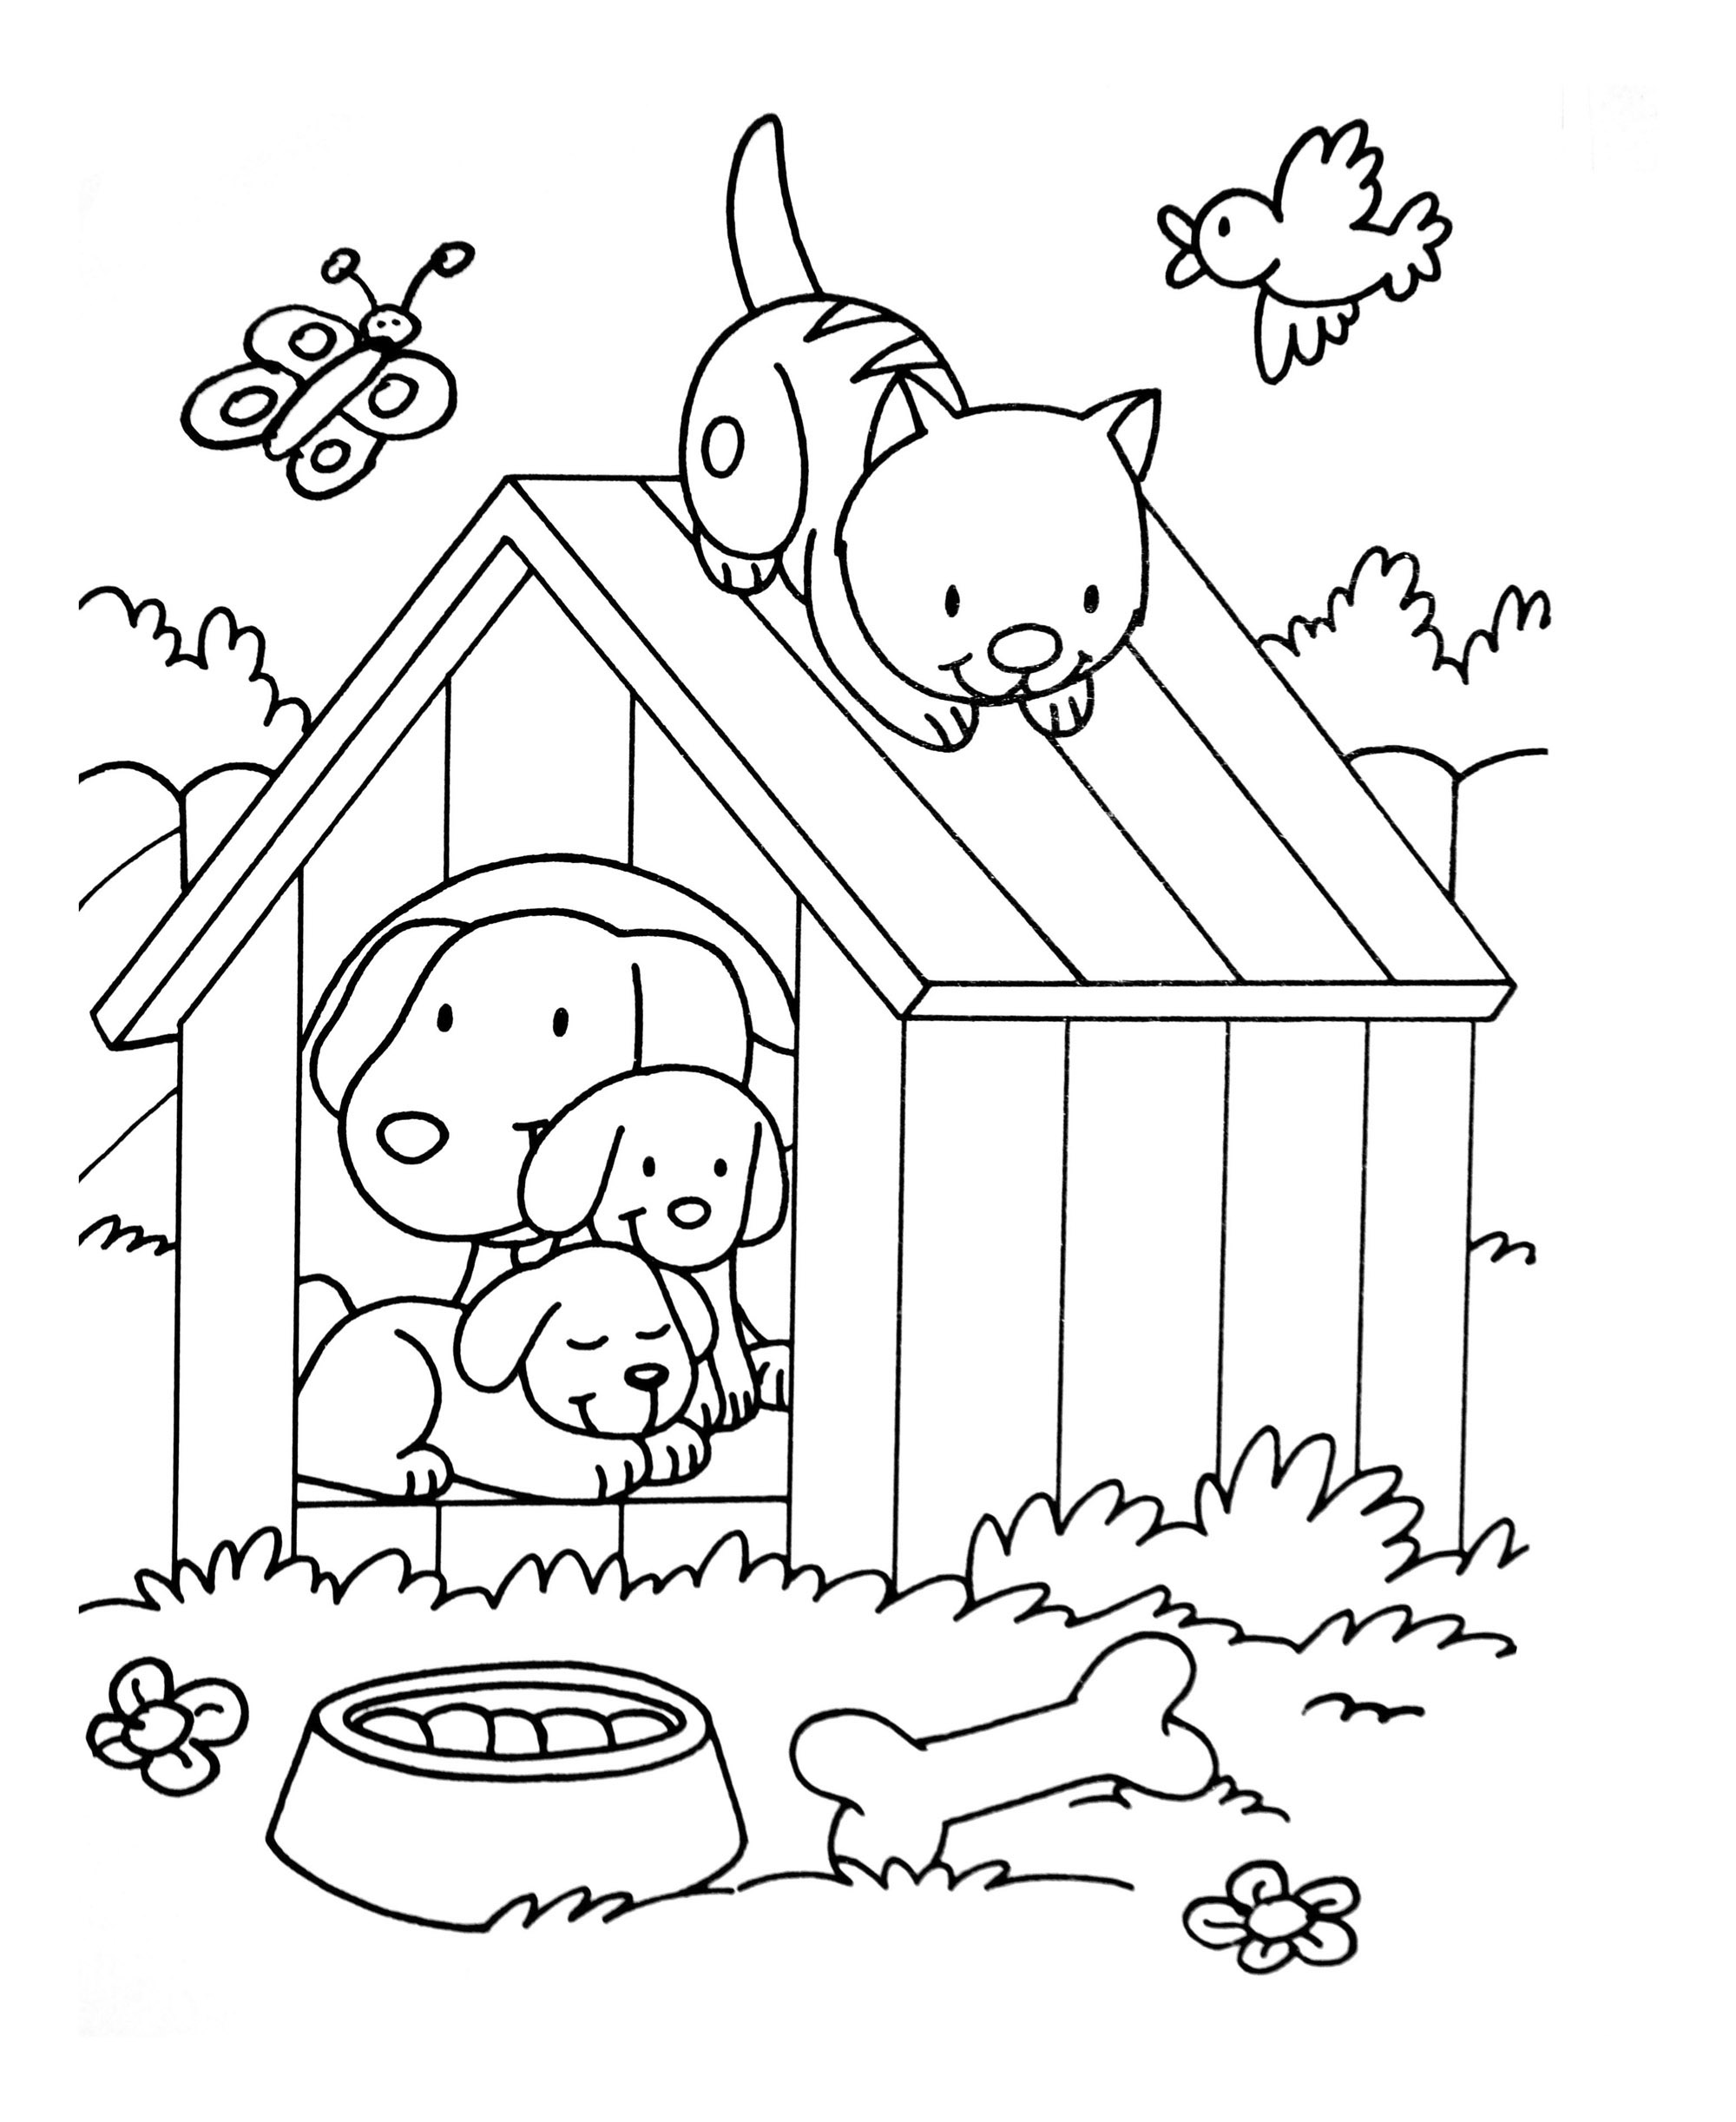 Free Coloring Pages Of Dogs And Cats